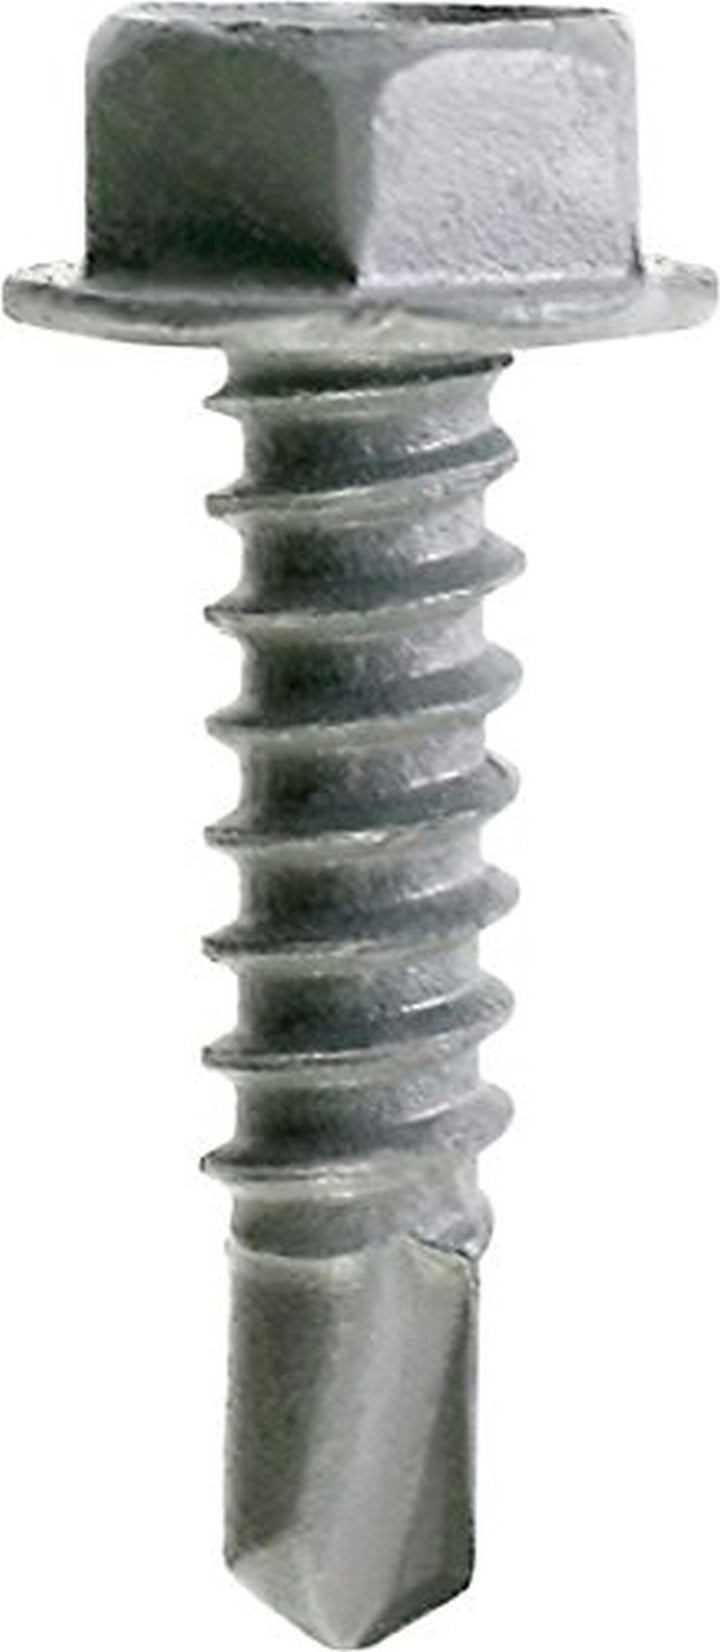 Simpson Strong-Tie XEQ34B1016M #10x3/4 Hex Drive Hex Washer Head Quik Guard Coating Steel Structural Screws, 1,000/Box